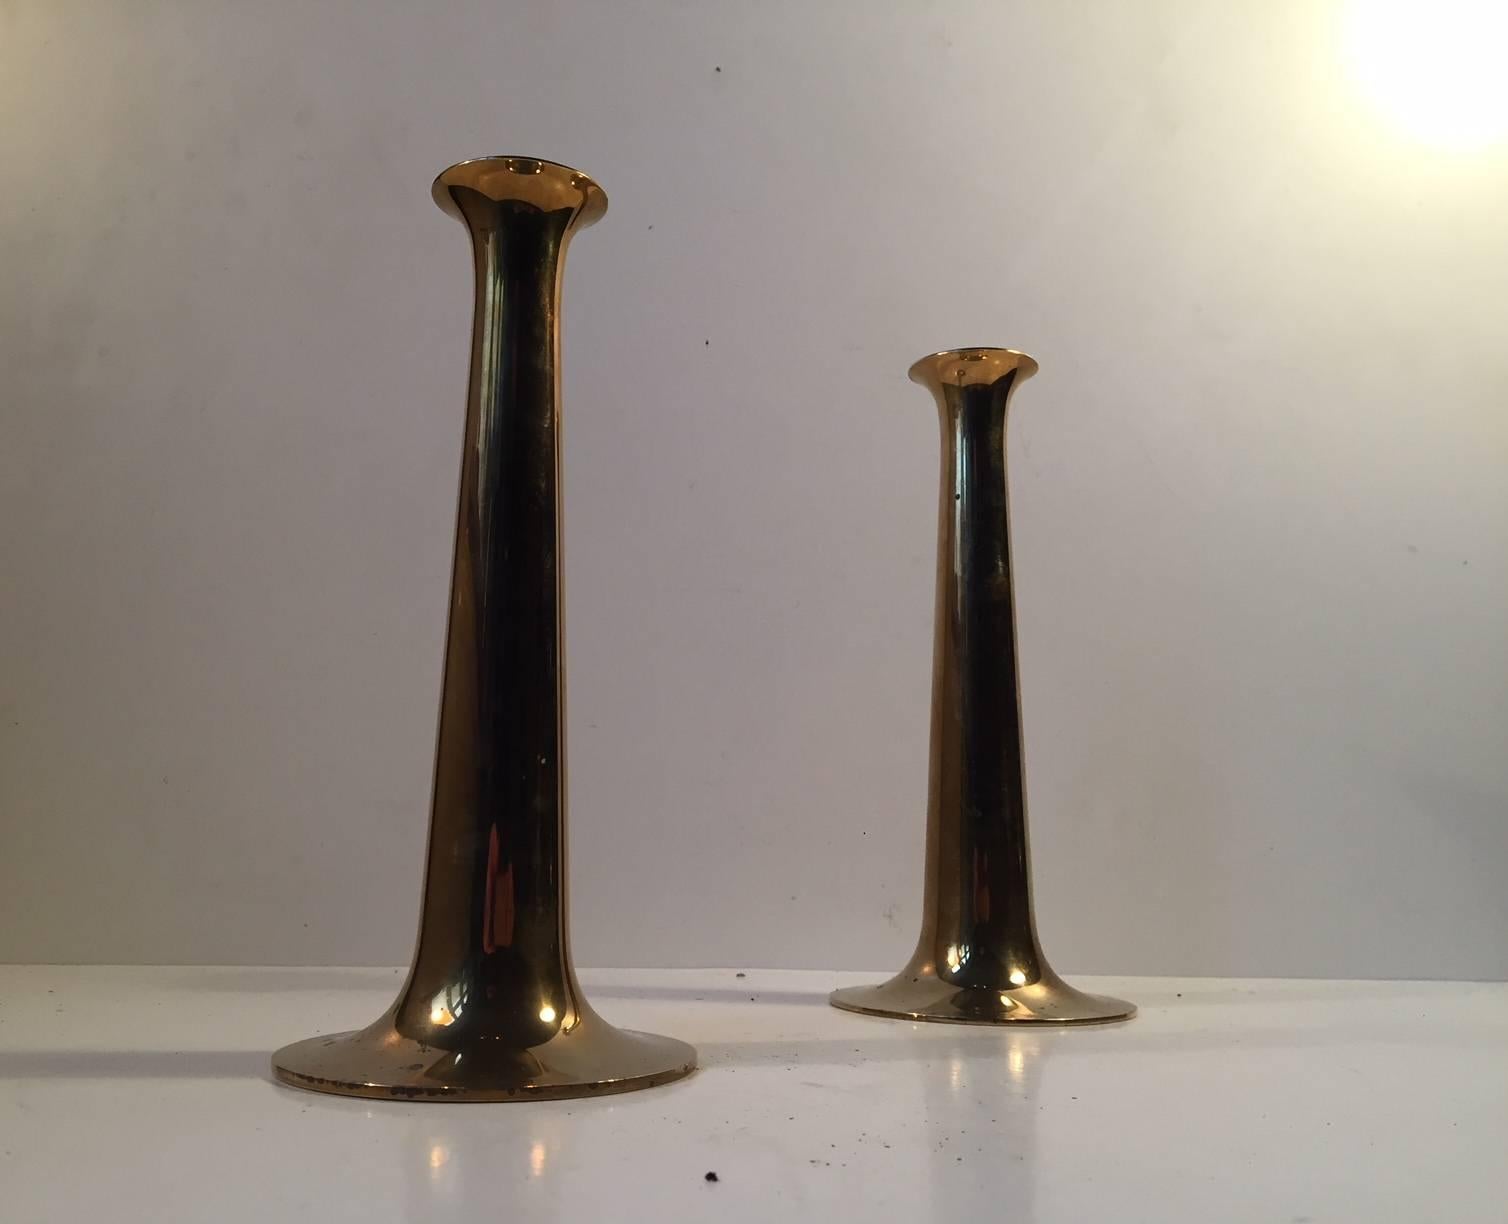 This pair of candlesticks were designed Hans Bolling and manufactured by Torben Orskov in Denmark during the 1960s. They are made from solid brass and feature the manufacturer's mark to each base. Overall nice and unpolished vintage condition. Only